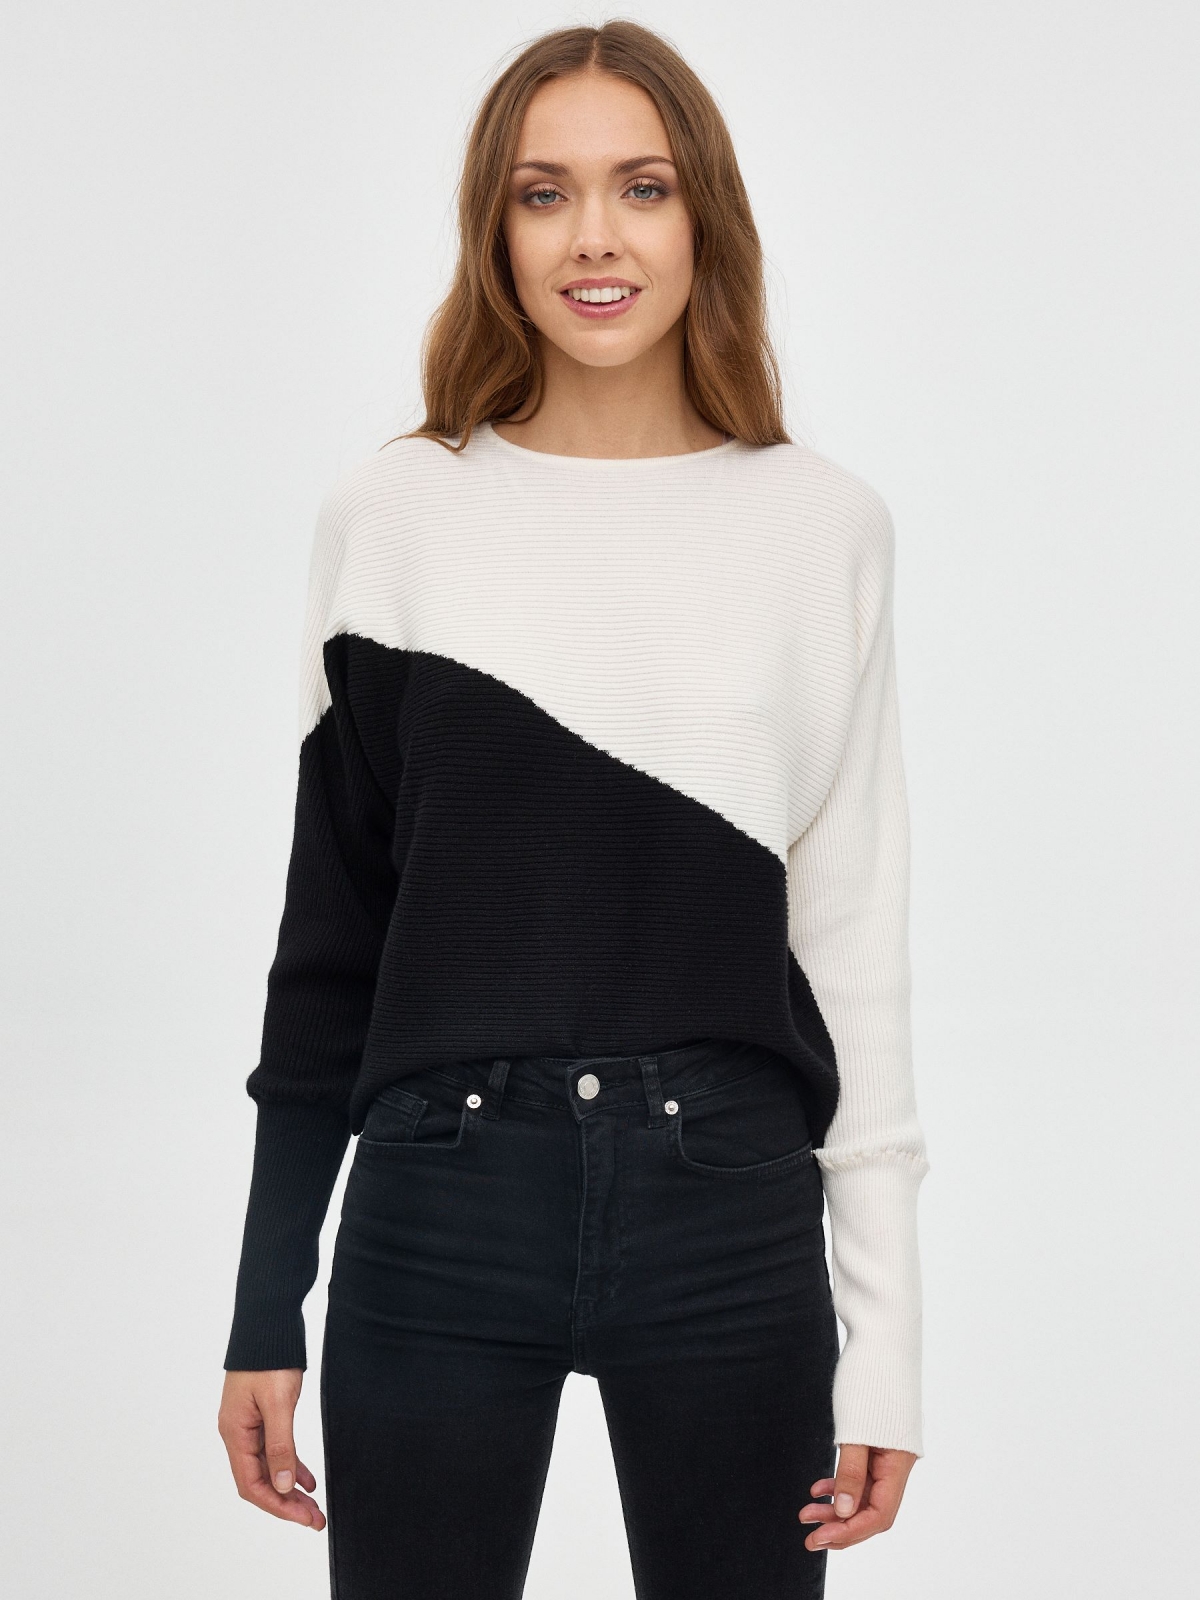 Balloon sleeve sweater black middle front view